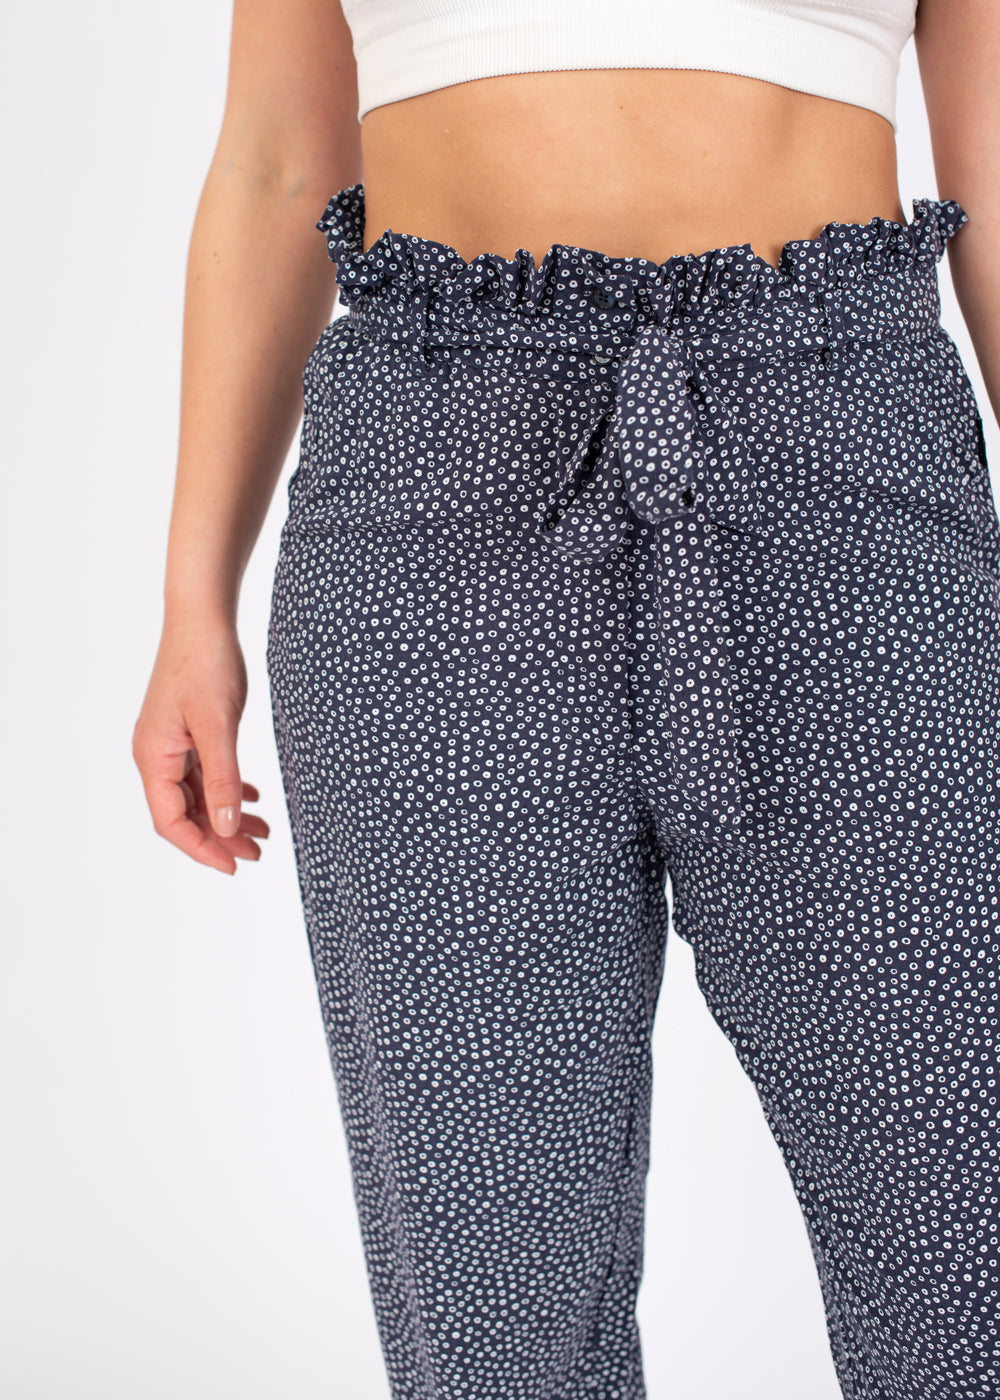 Prtgrouper Summer Trousers by Protest